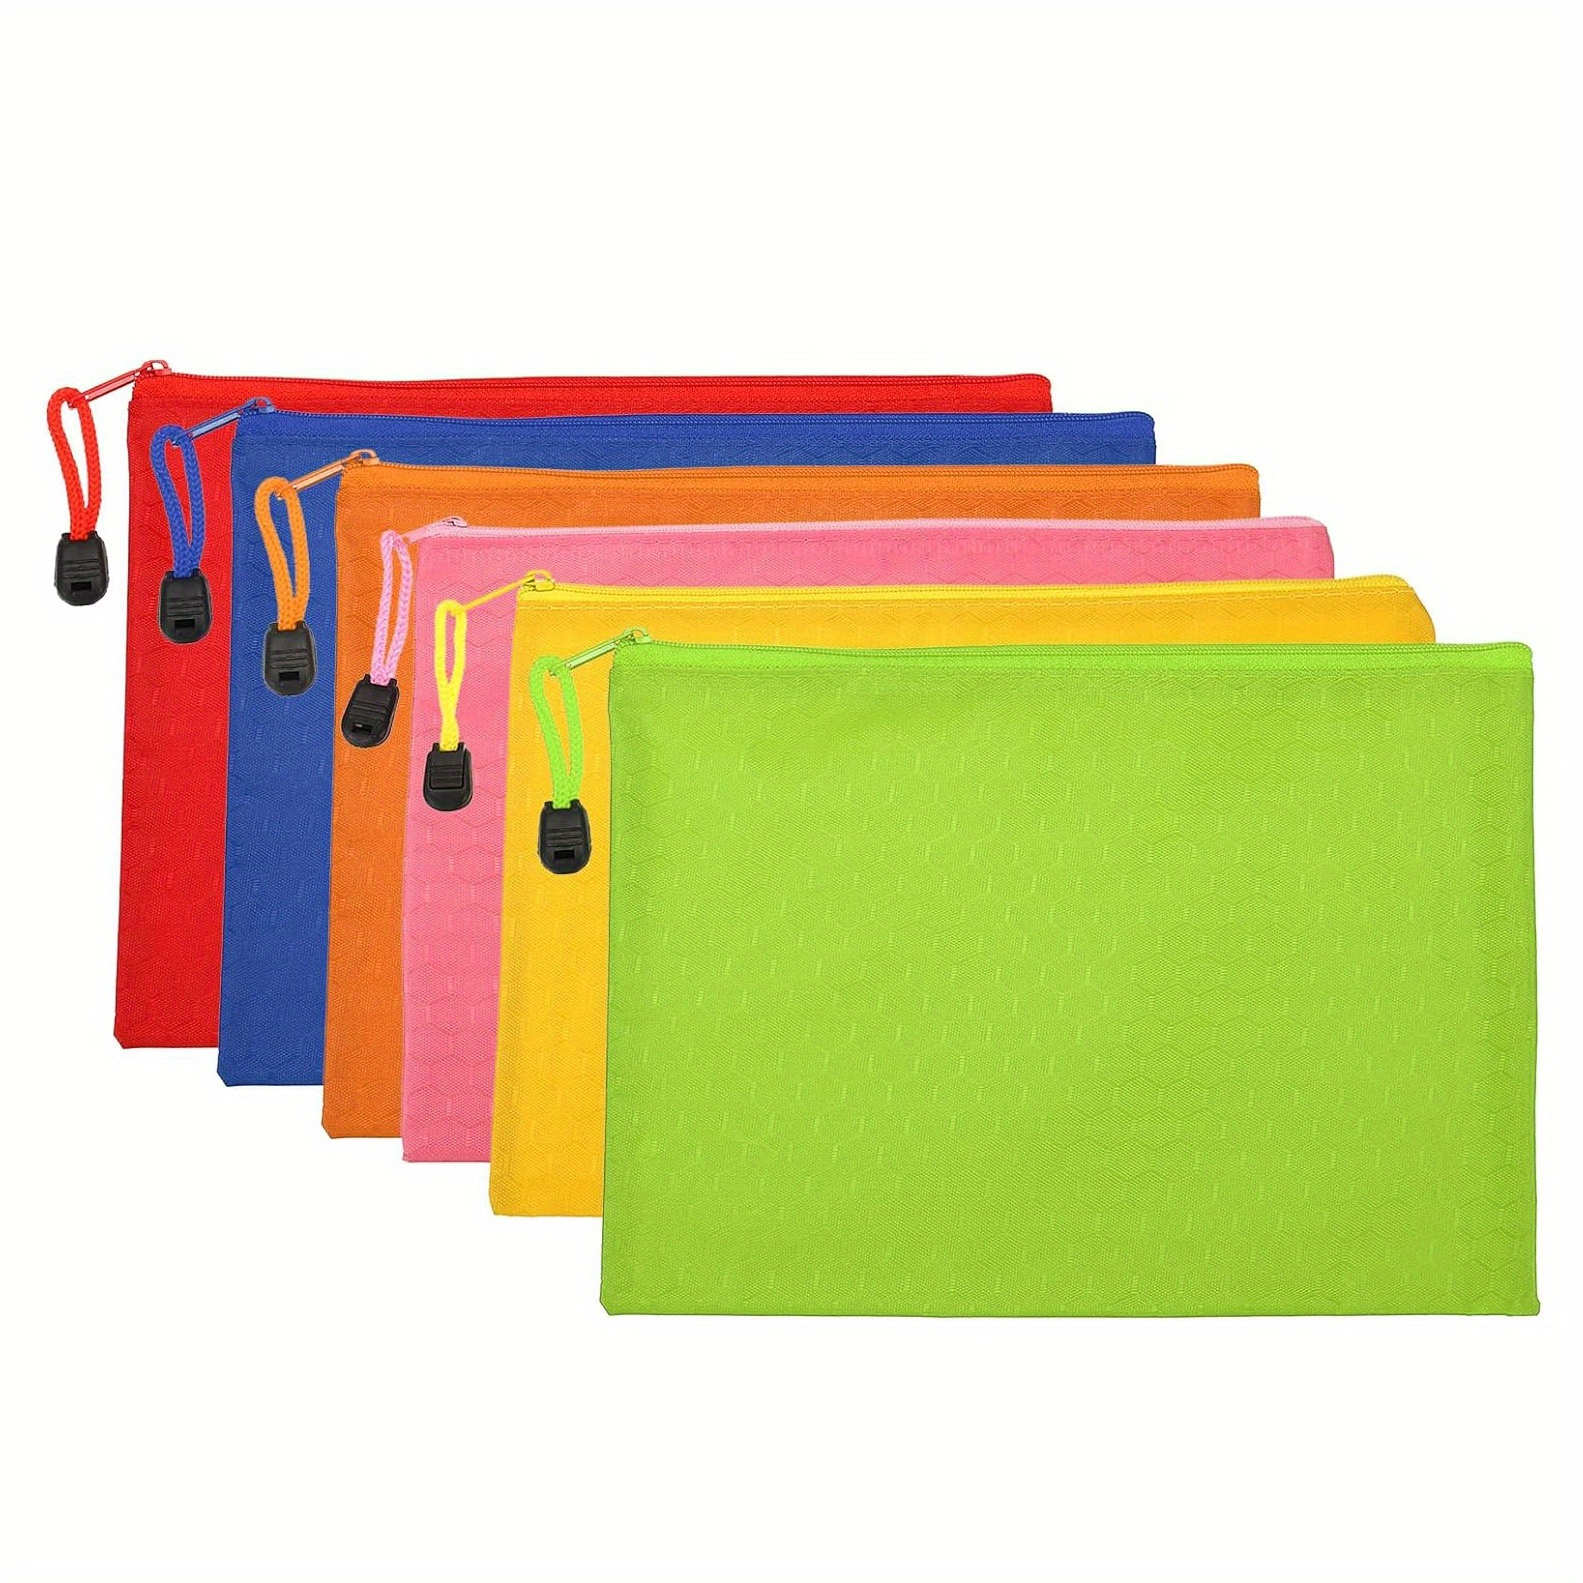 

6-piece Multicolor Waterproof Zippered Document Bags - A5 Size, Durable Oxford Fabric Pencil Pouches For Office Supplies, , Cosmetics & Travel Fabric Zipper Pencil Case Pen Bags For Packaging